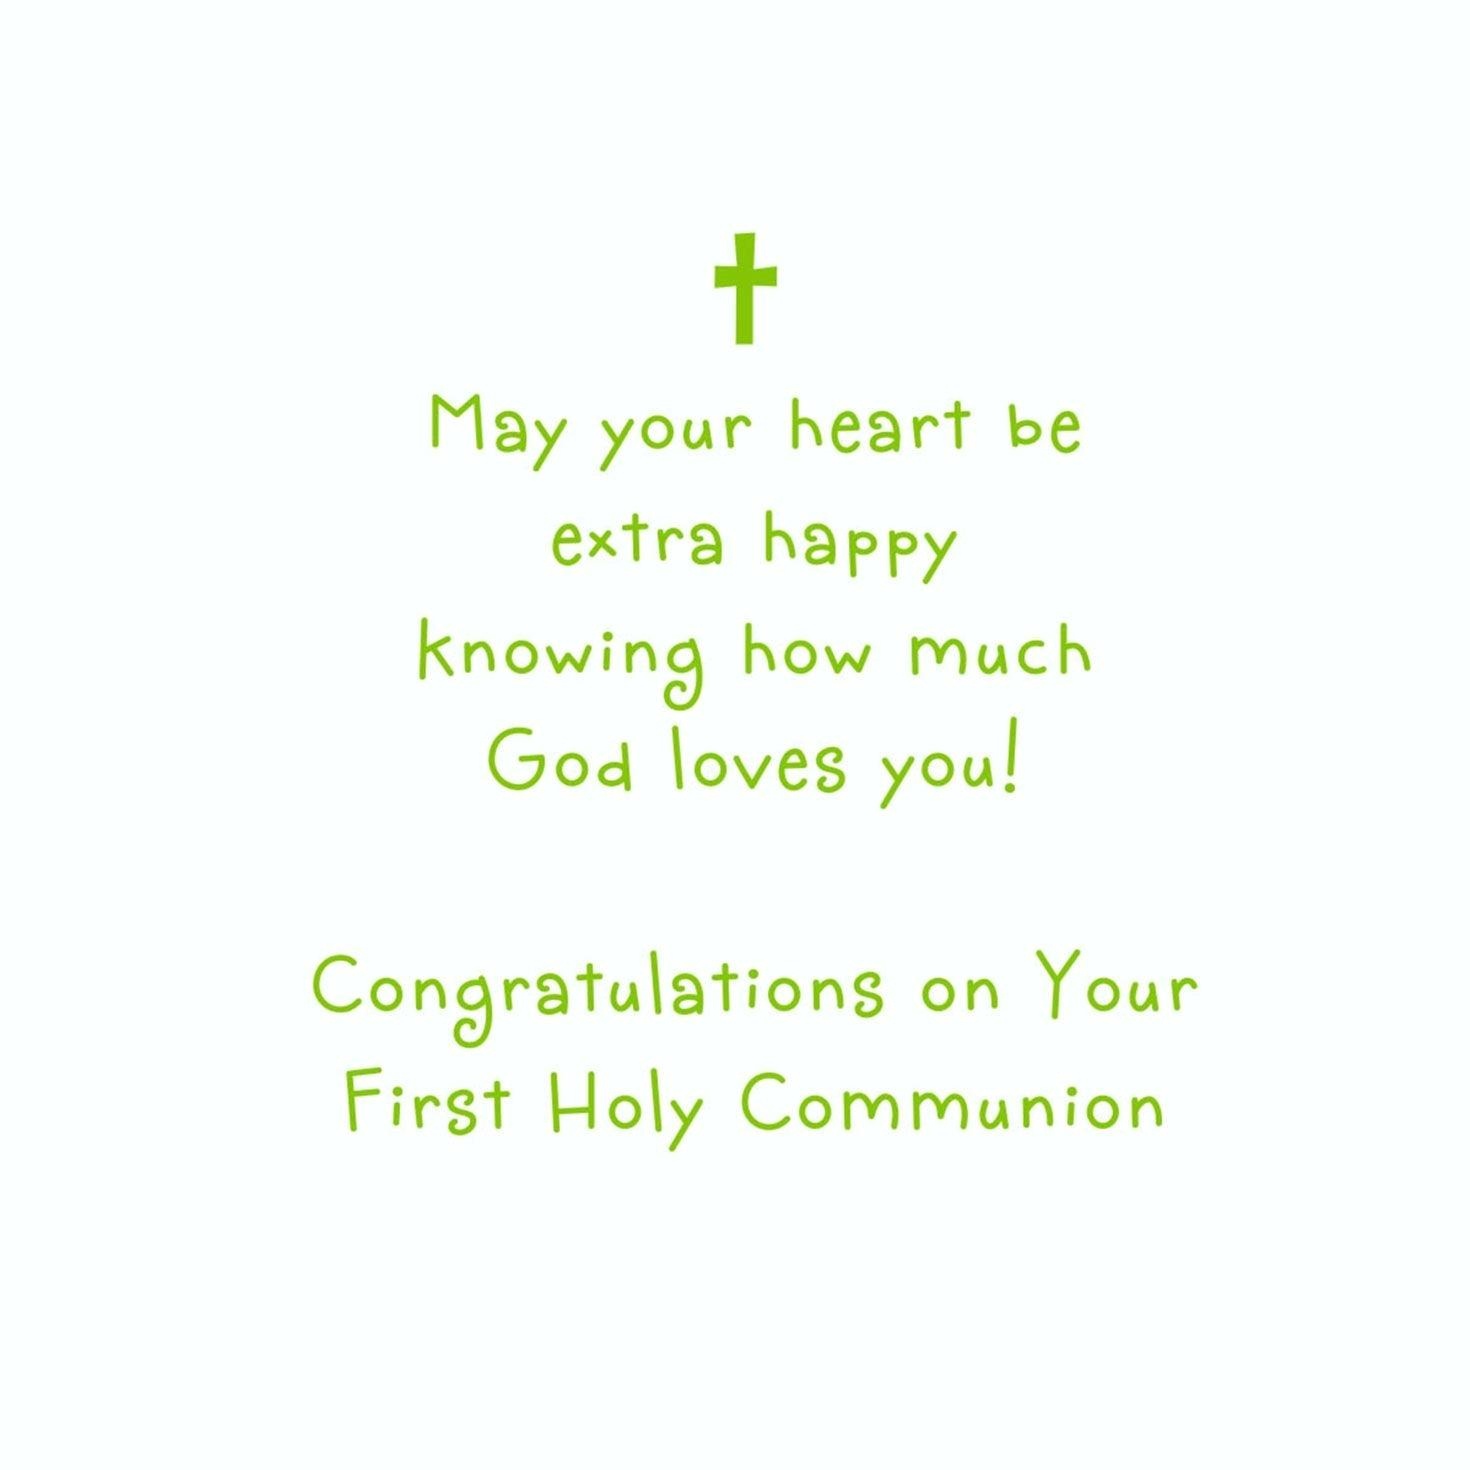 First Holy Communion Cards Printable Free - First Holy Communion Cards Printable Free